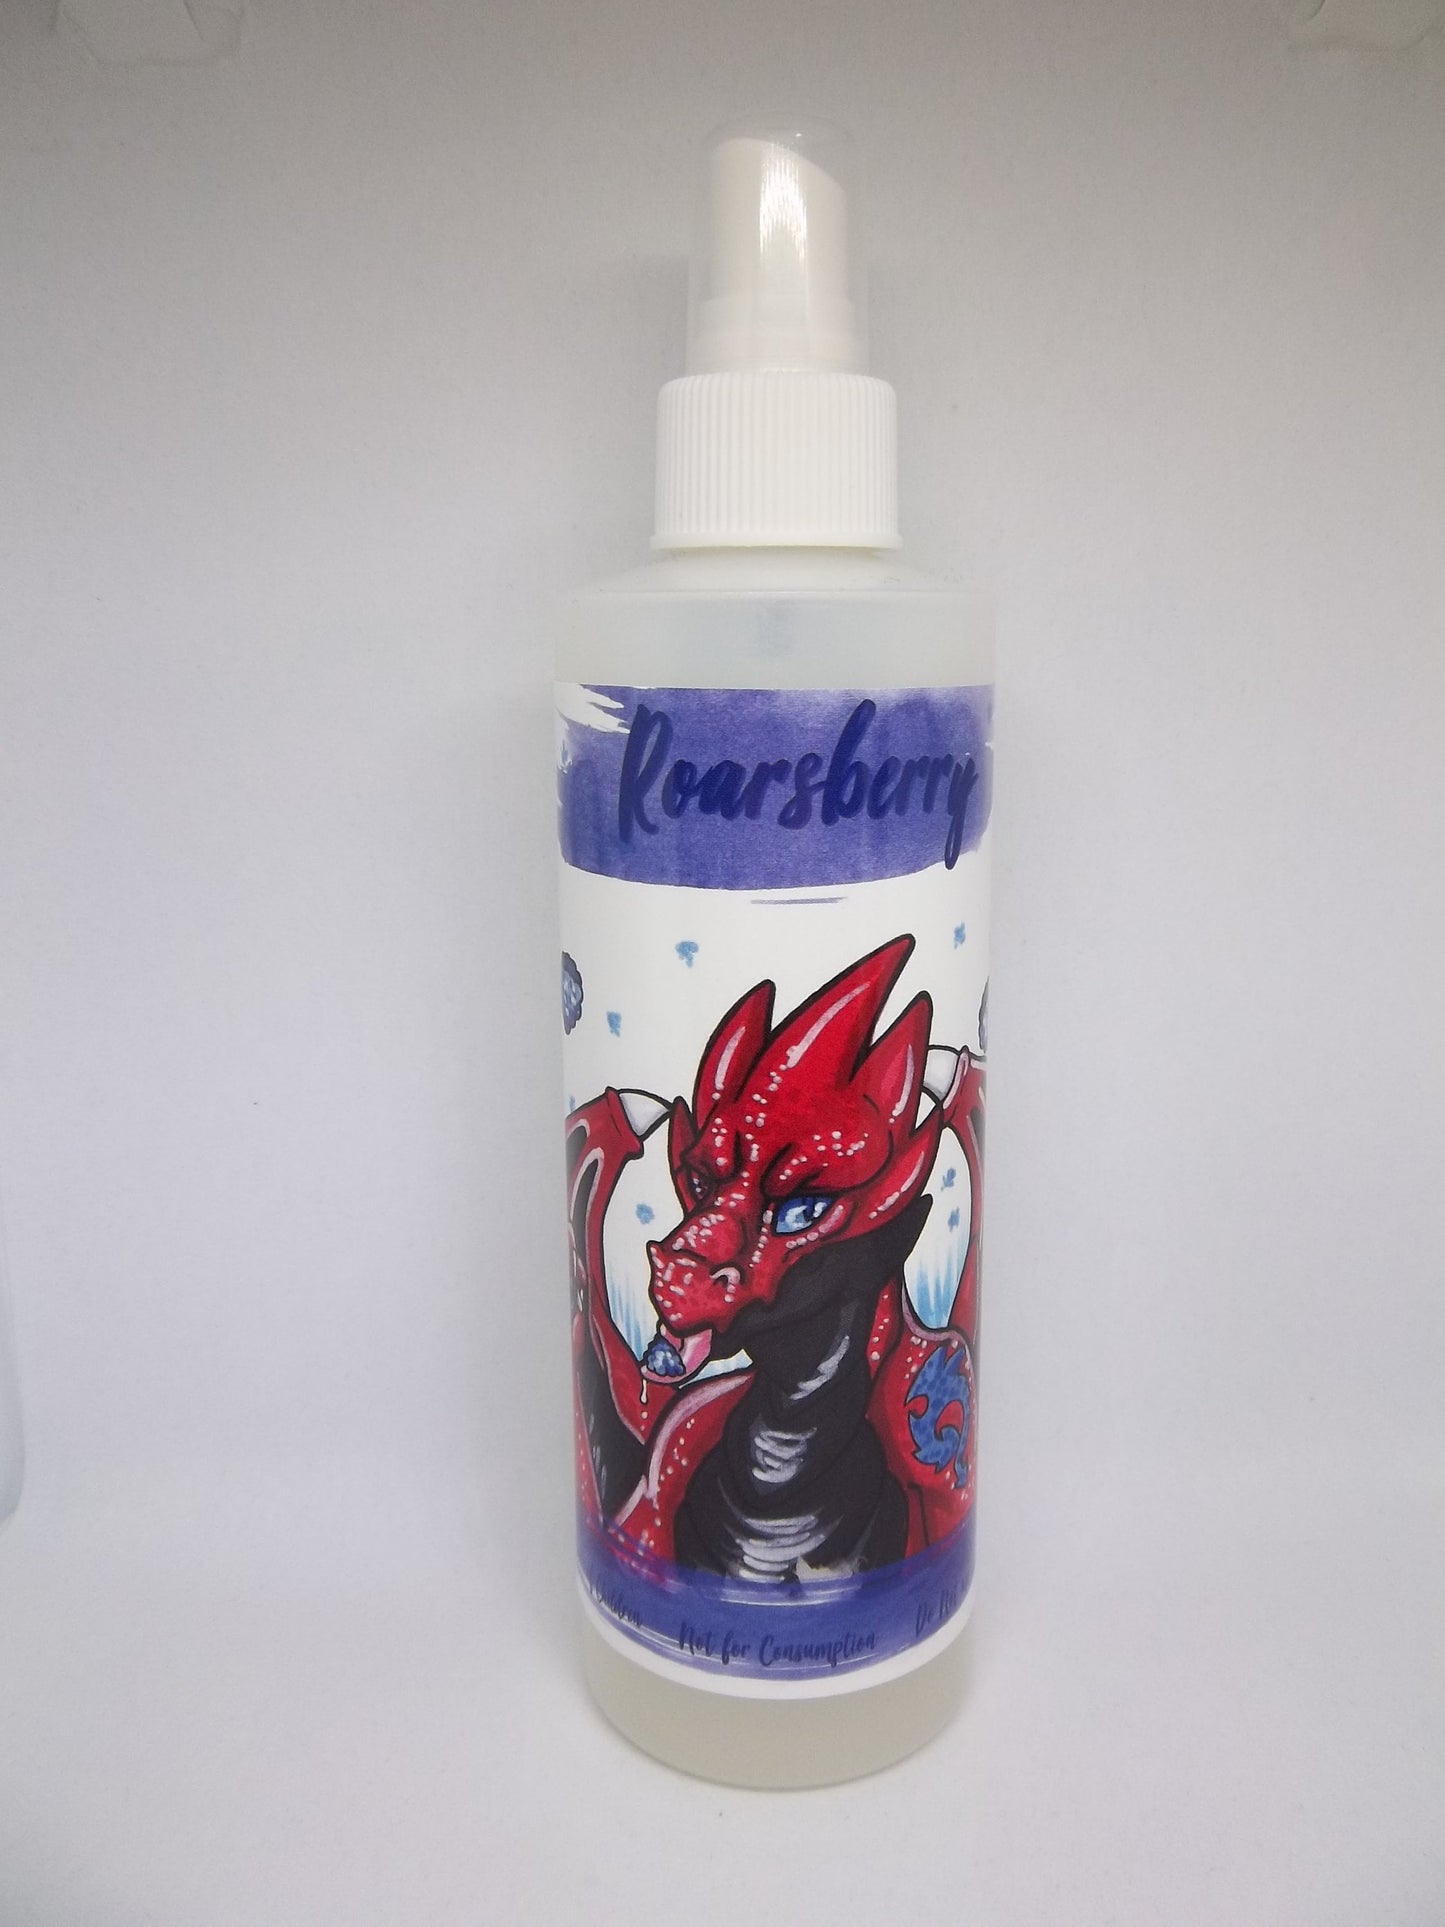 Blue Raspberry Fursuit Spray 8oz - Roarsberry Fragrance and Essential Costume Cleaner